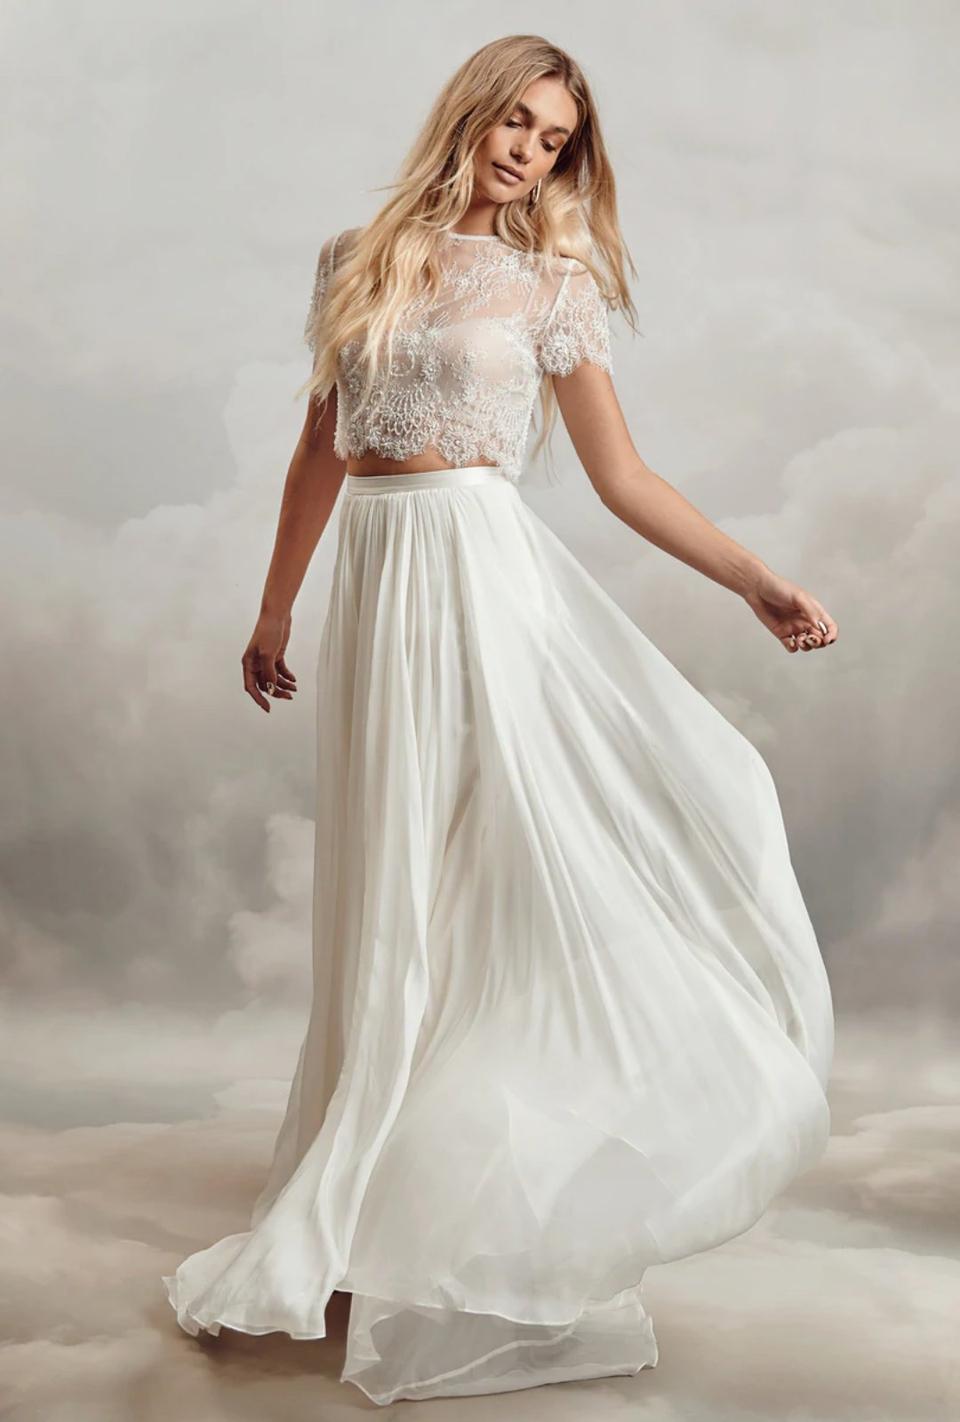 33 Best Two-Piece Wedding Dresses & Bridal Separates - hitched.co.uk ...